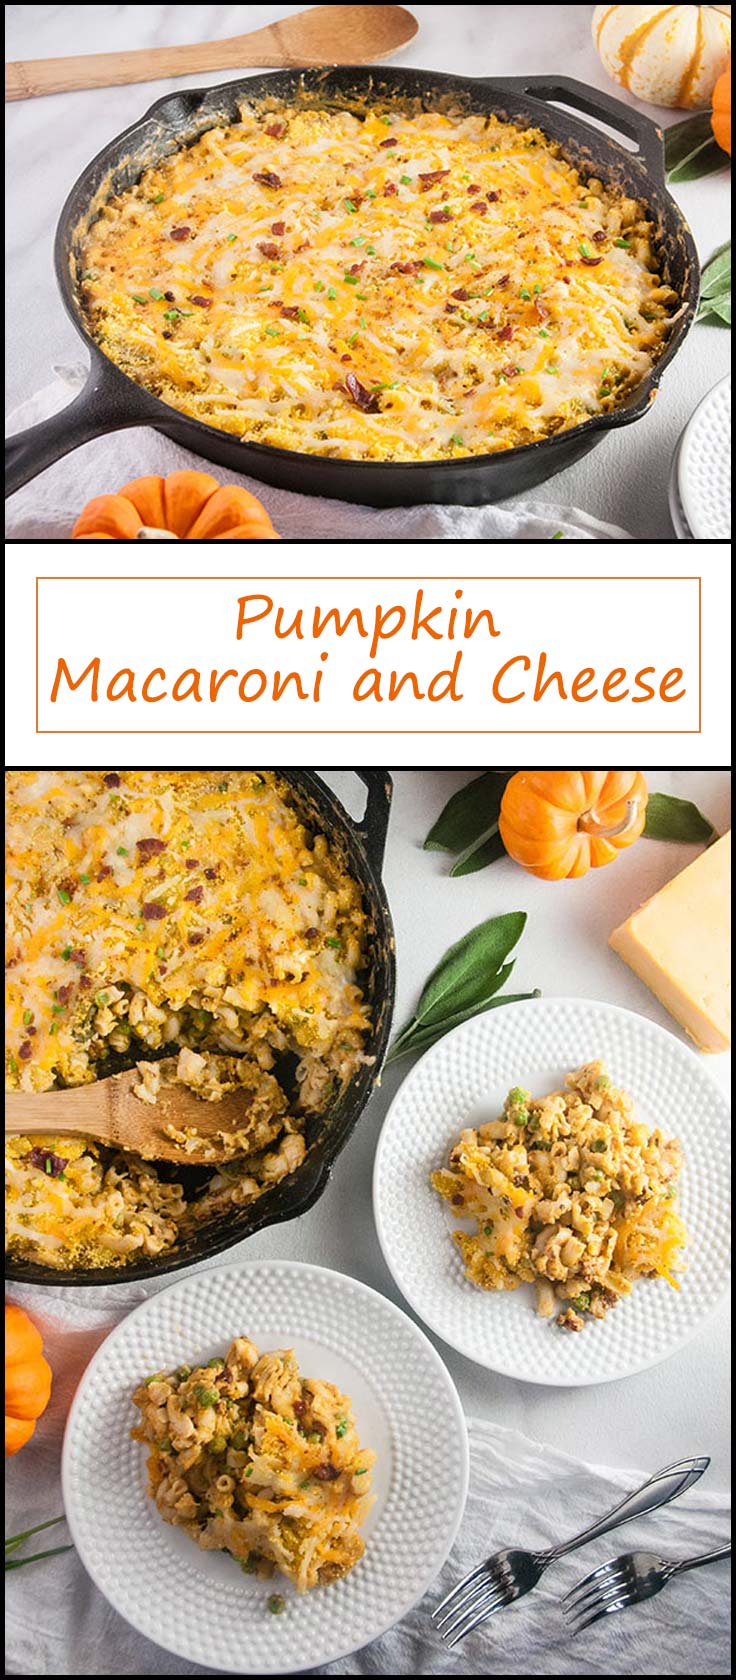 Pumpkin Macaroni and Cheese with Pancetta and Peas from www.seasonedsprinkles.com